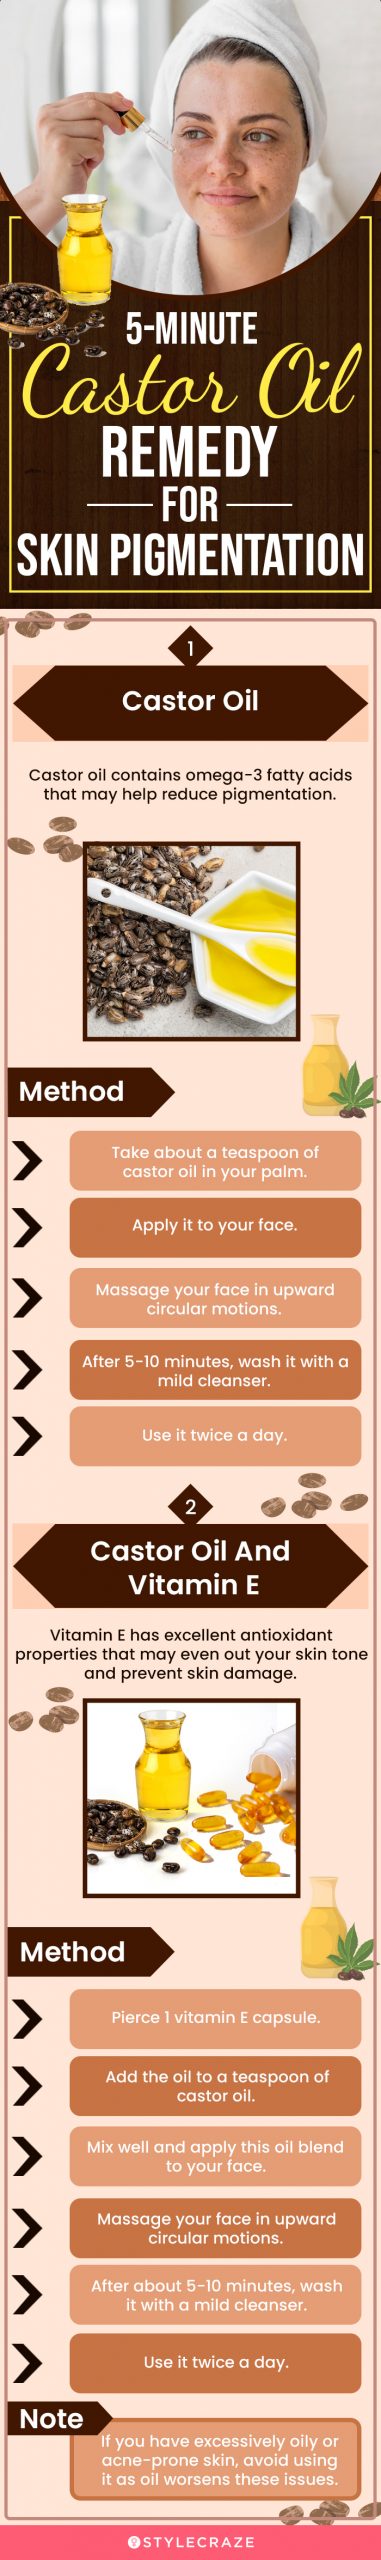 5minute castor oil remedy for skin pigmentation (infographic)